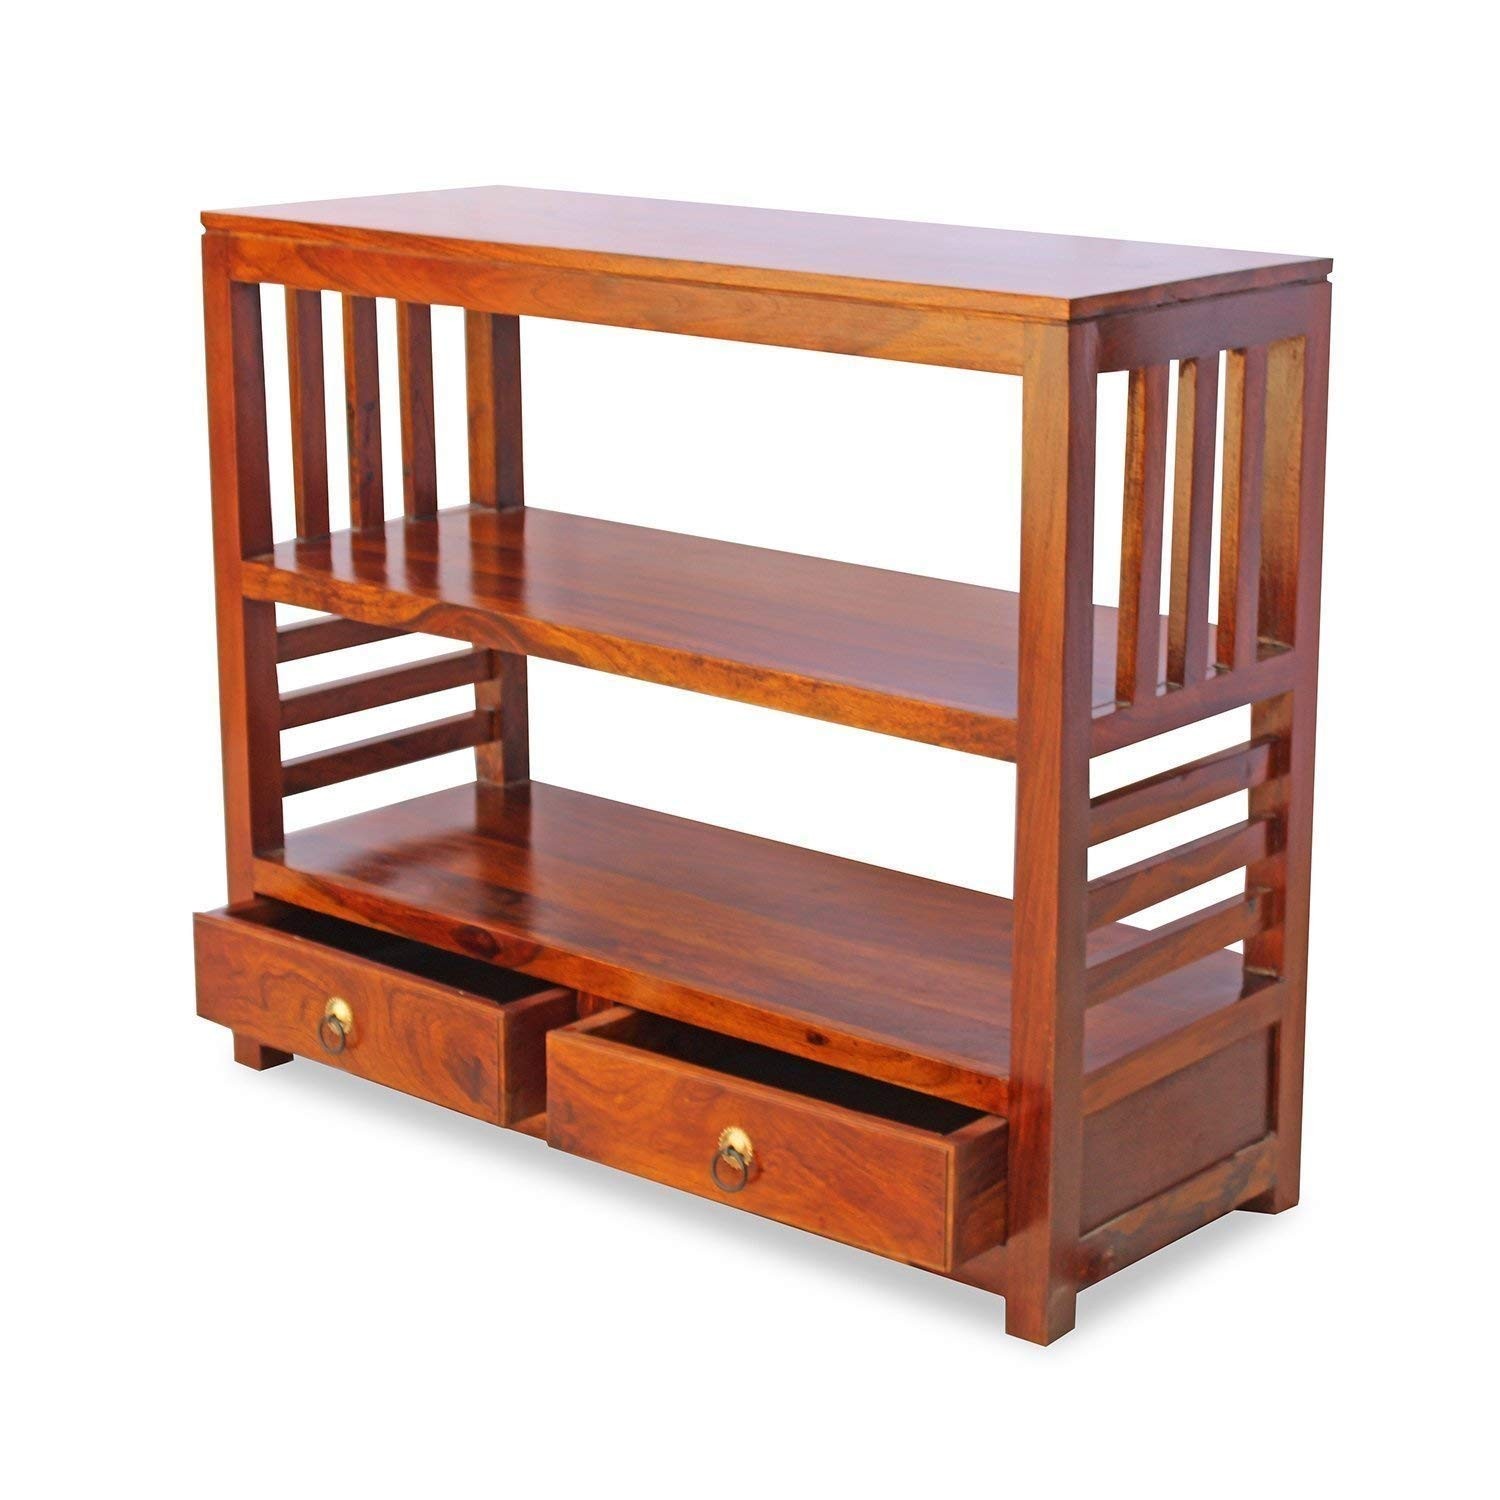 Lacey Sheesham Wood Console Tables with 2 Drawer for Living Room (Teak Finish)